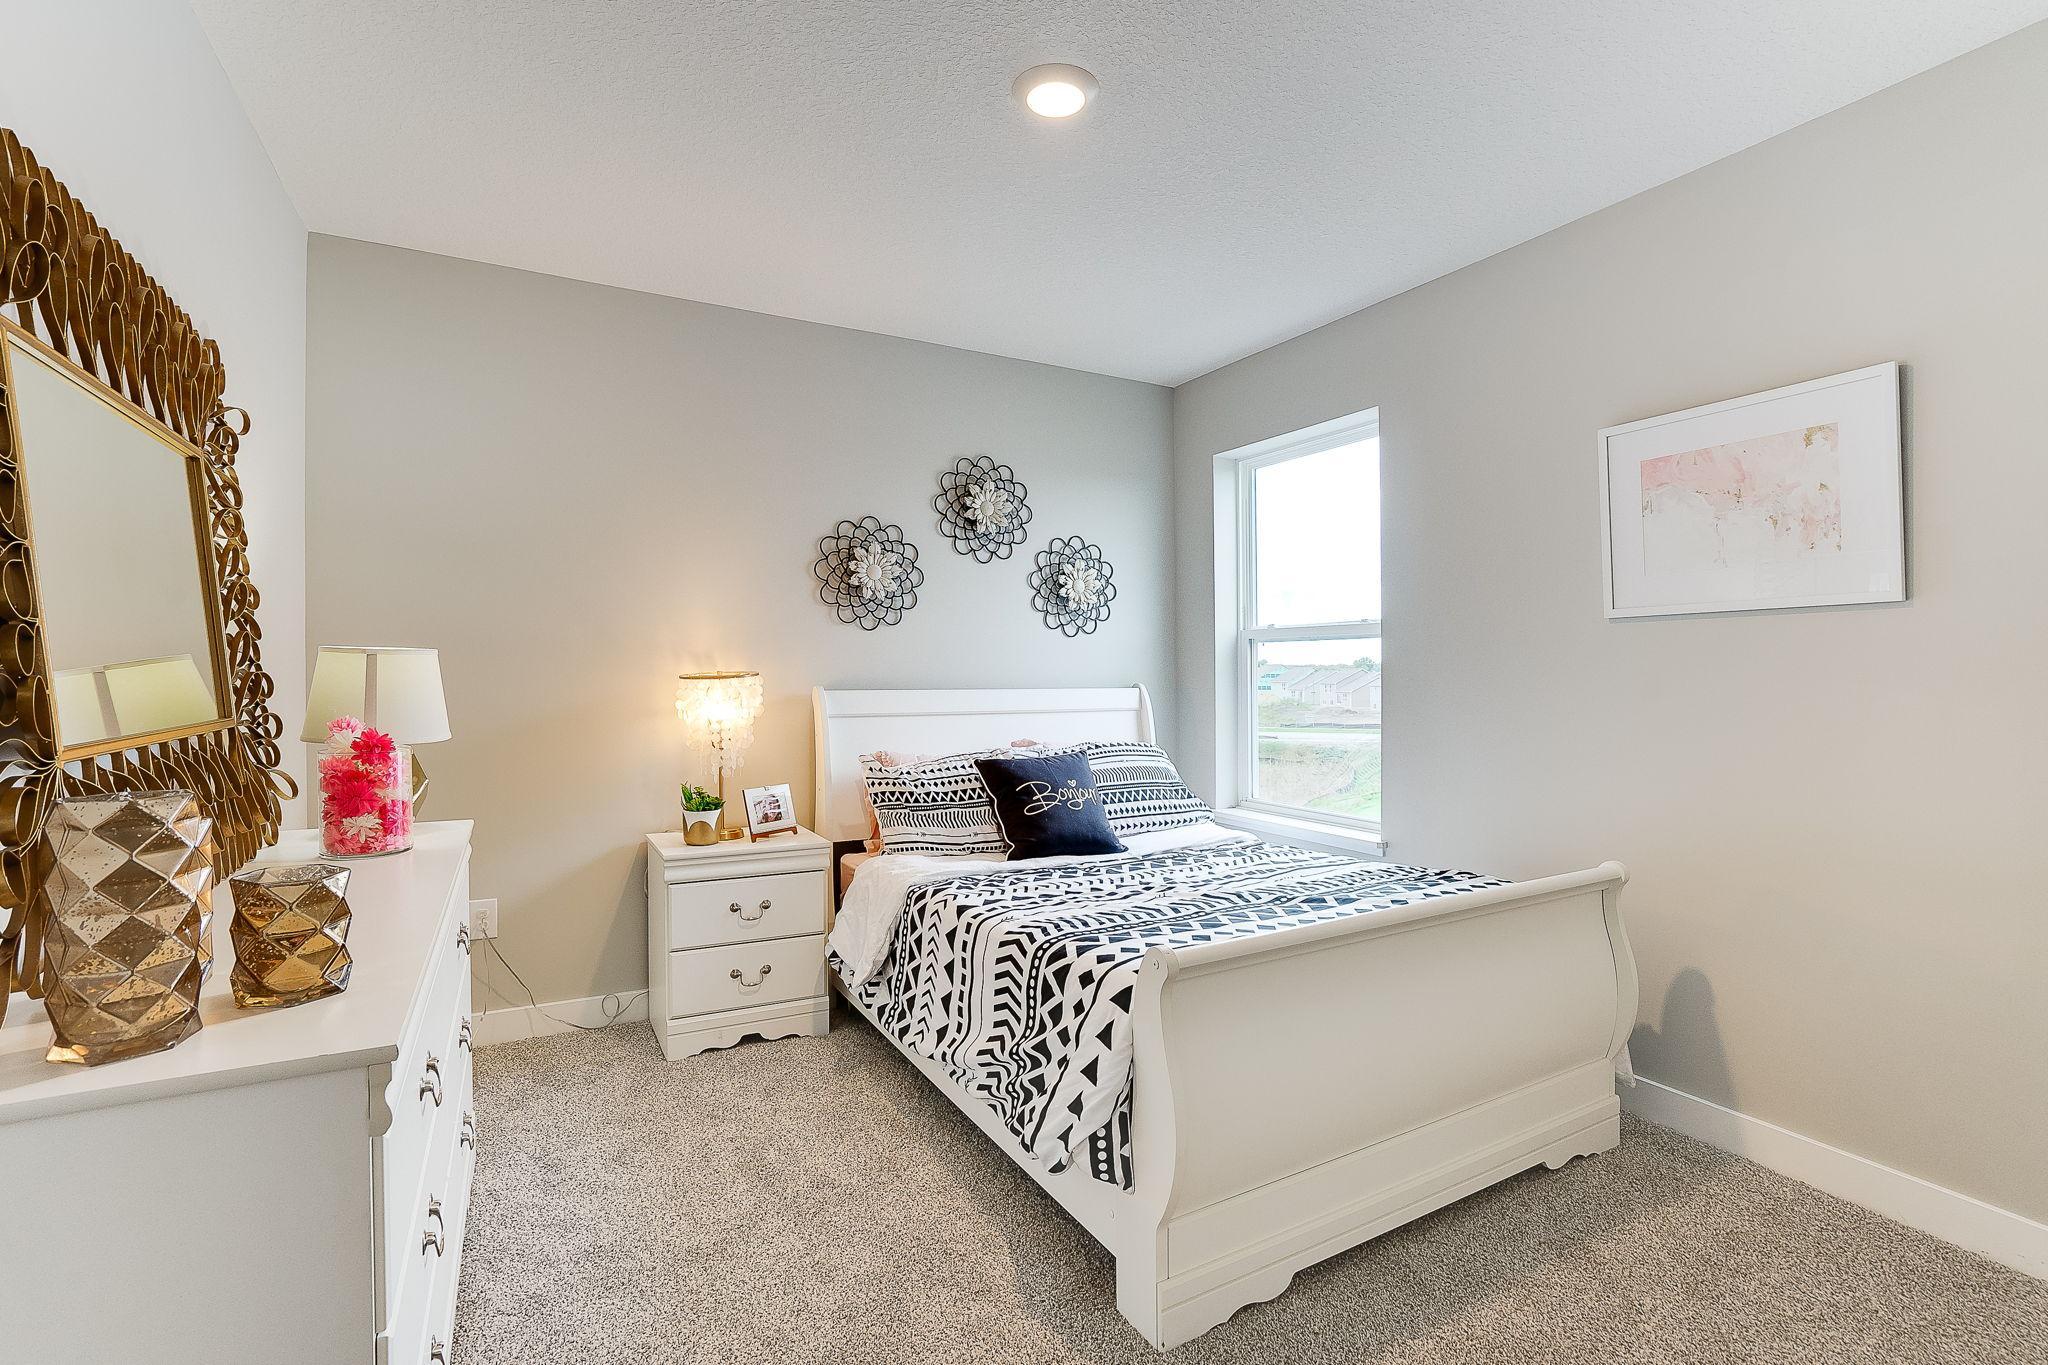 One of three additional bedrooms - all providing a great setting for the kids, guests, or an office. (Model home, colors will vary)